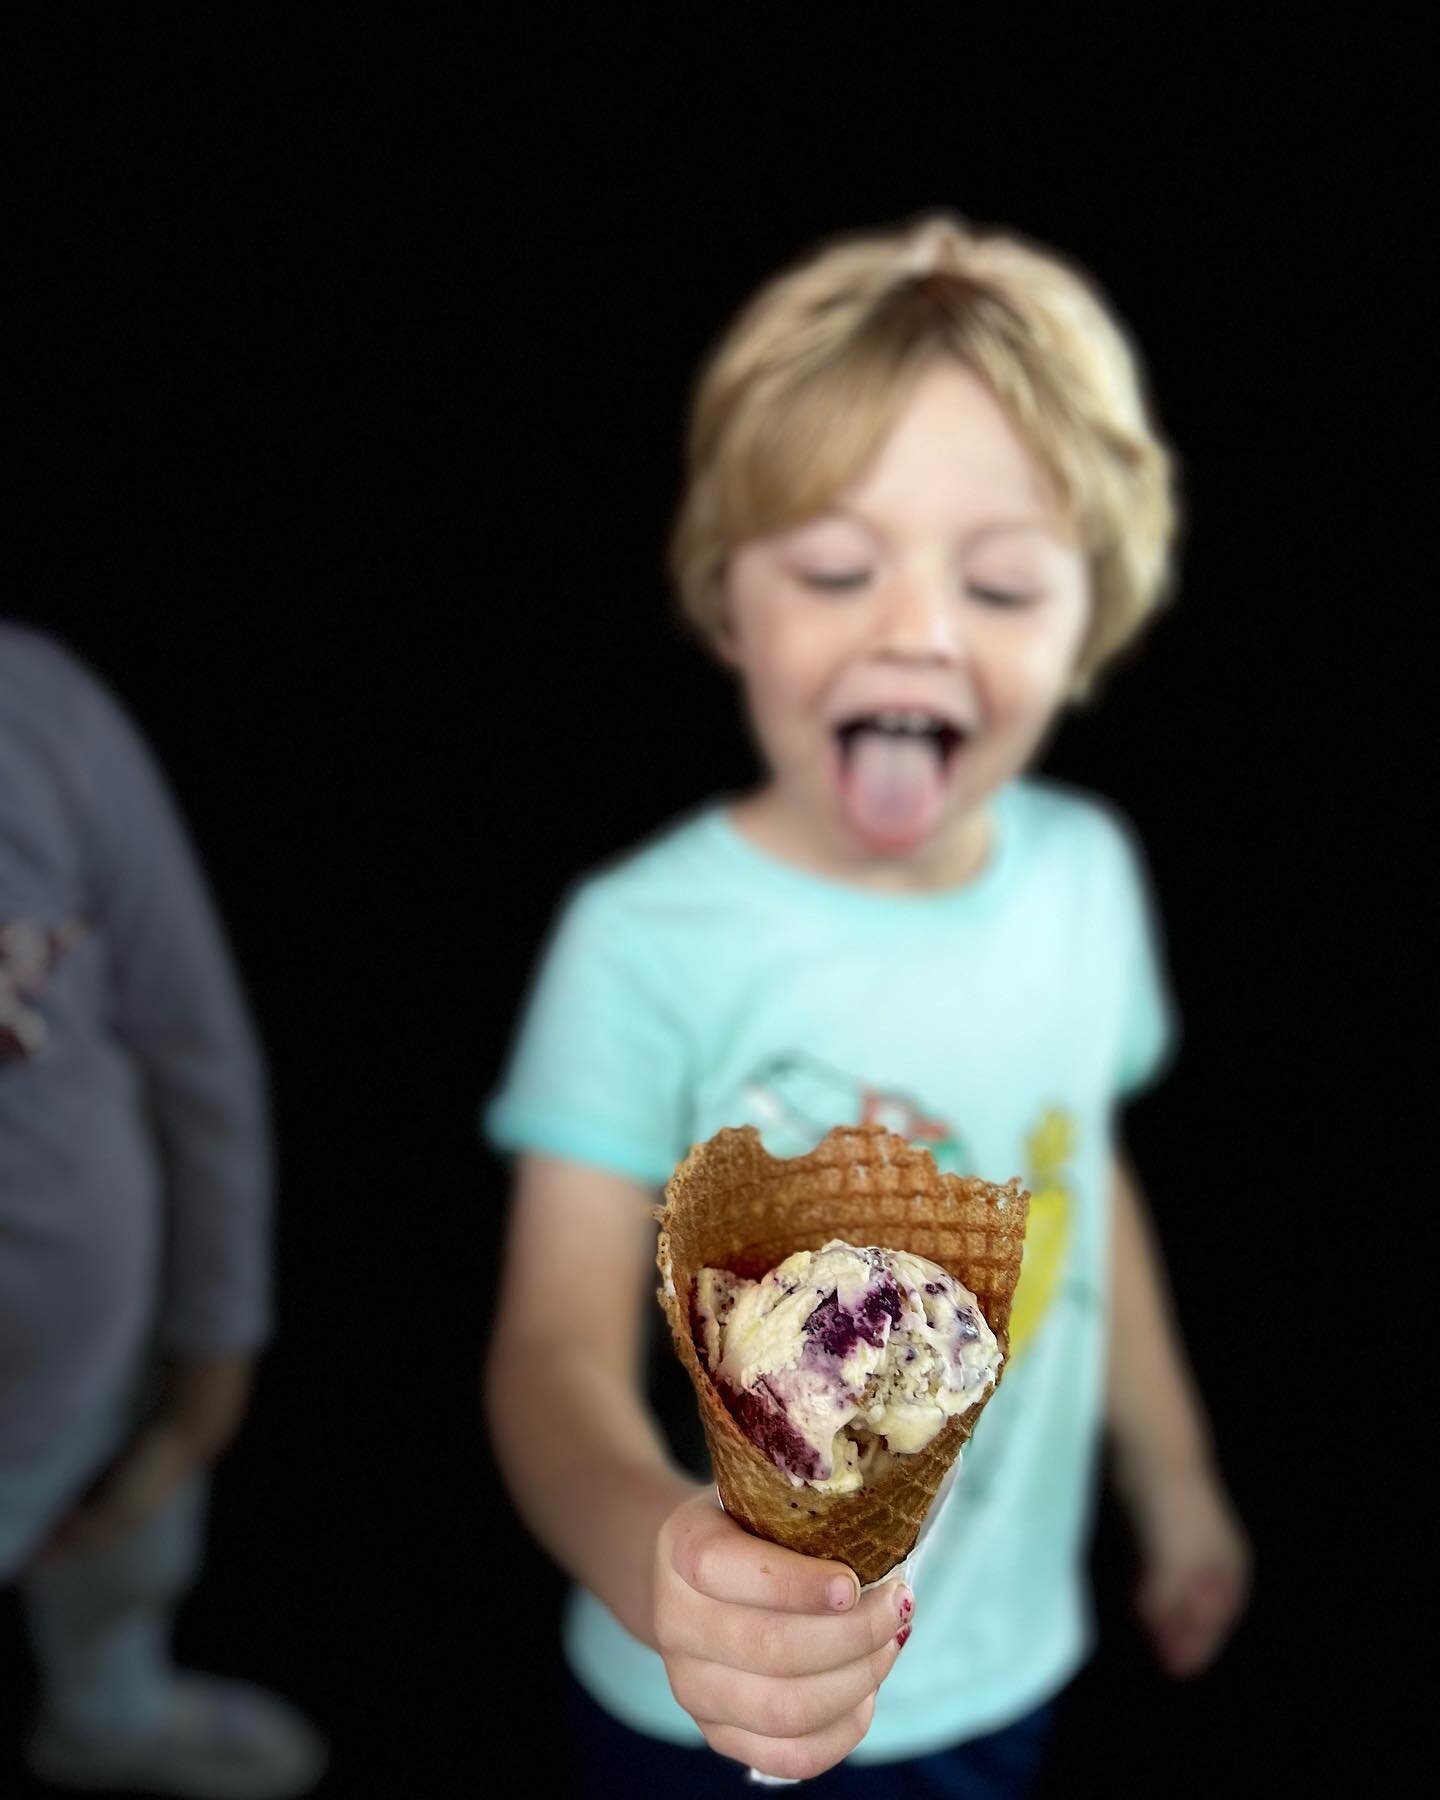 It can be hard to wait on a scoop of that Lemon with Blueberry Swirl, but it is worth the wait!